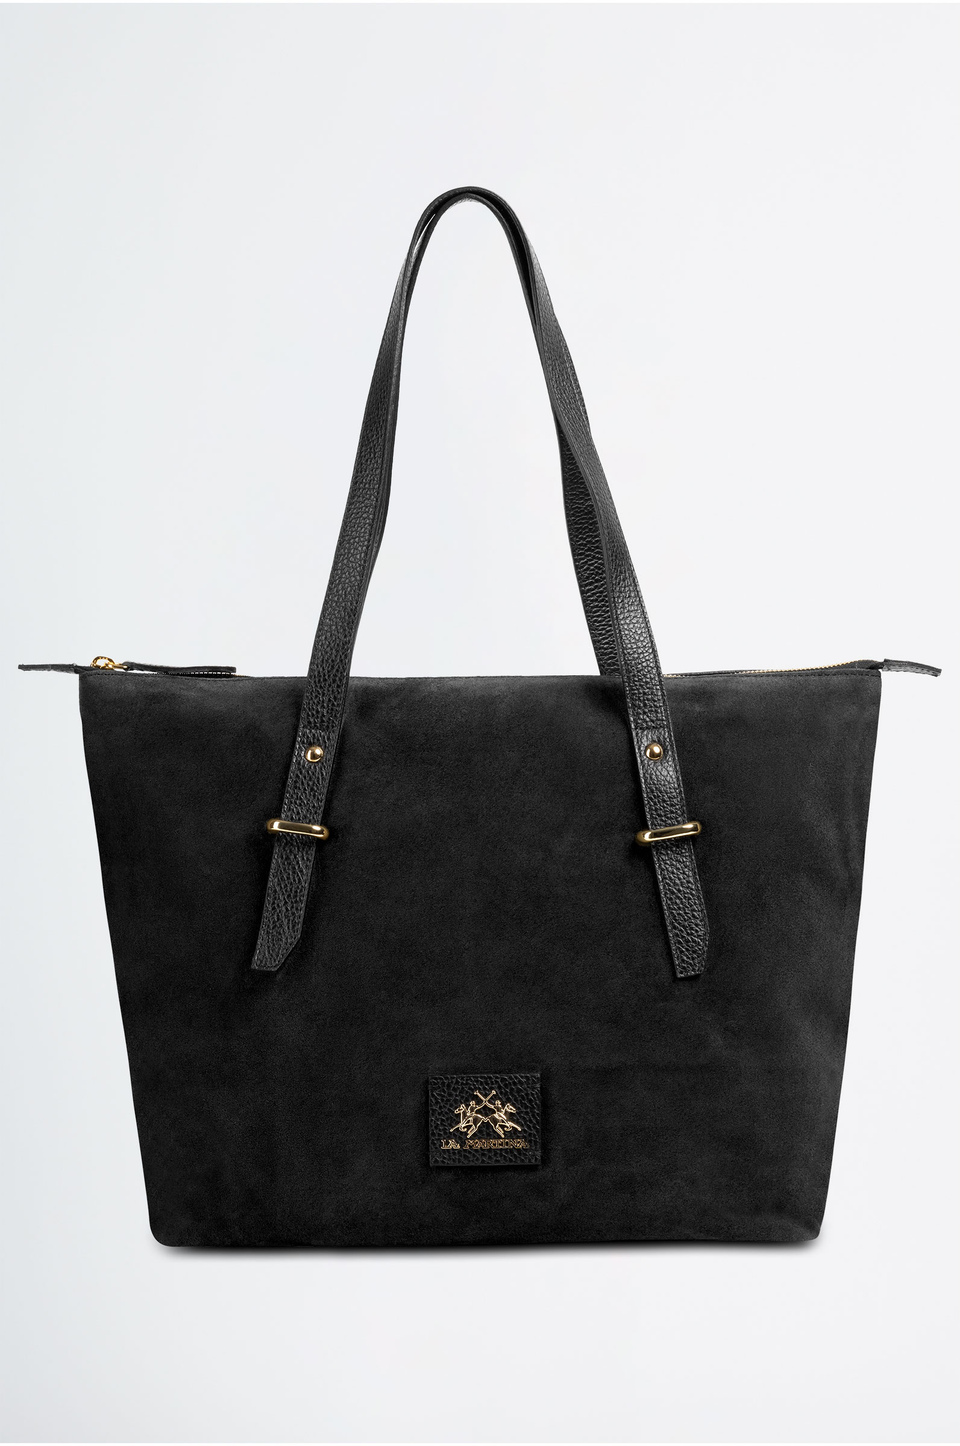 Double handle shopper in synthetic PU fabric | La Martina - Official Online Shop